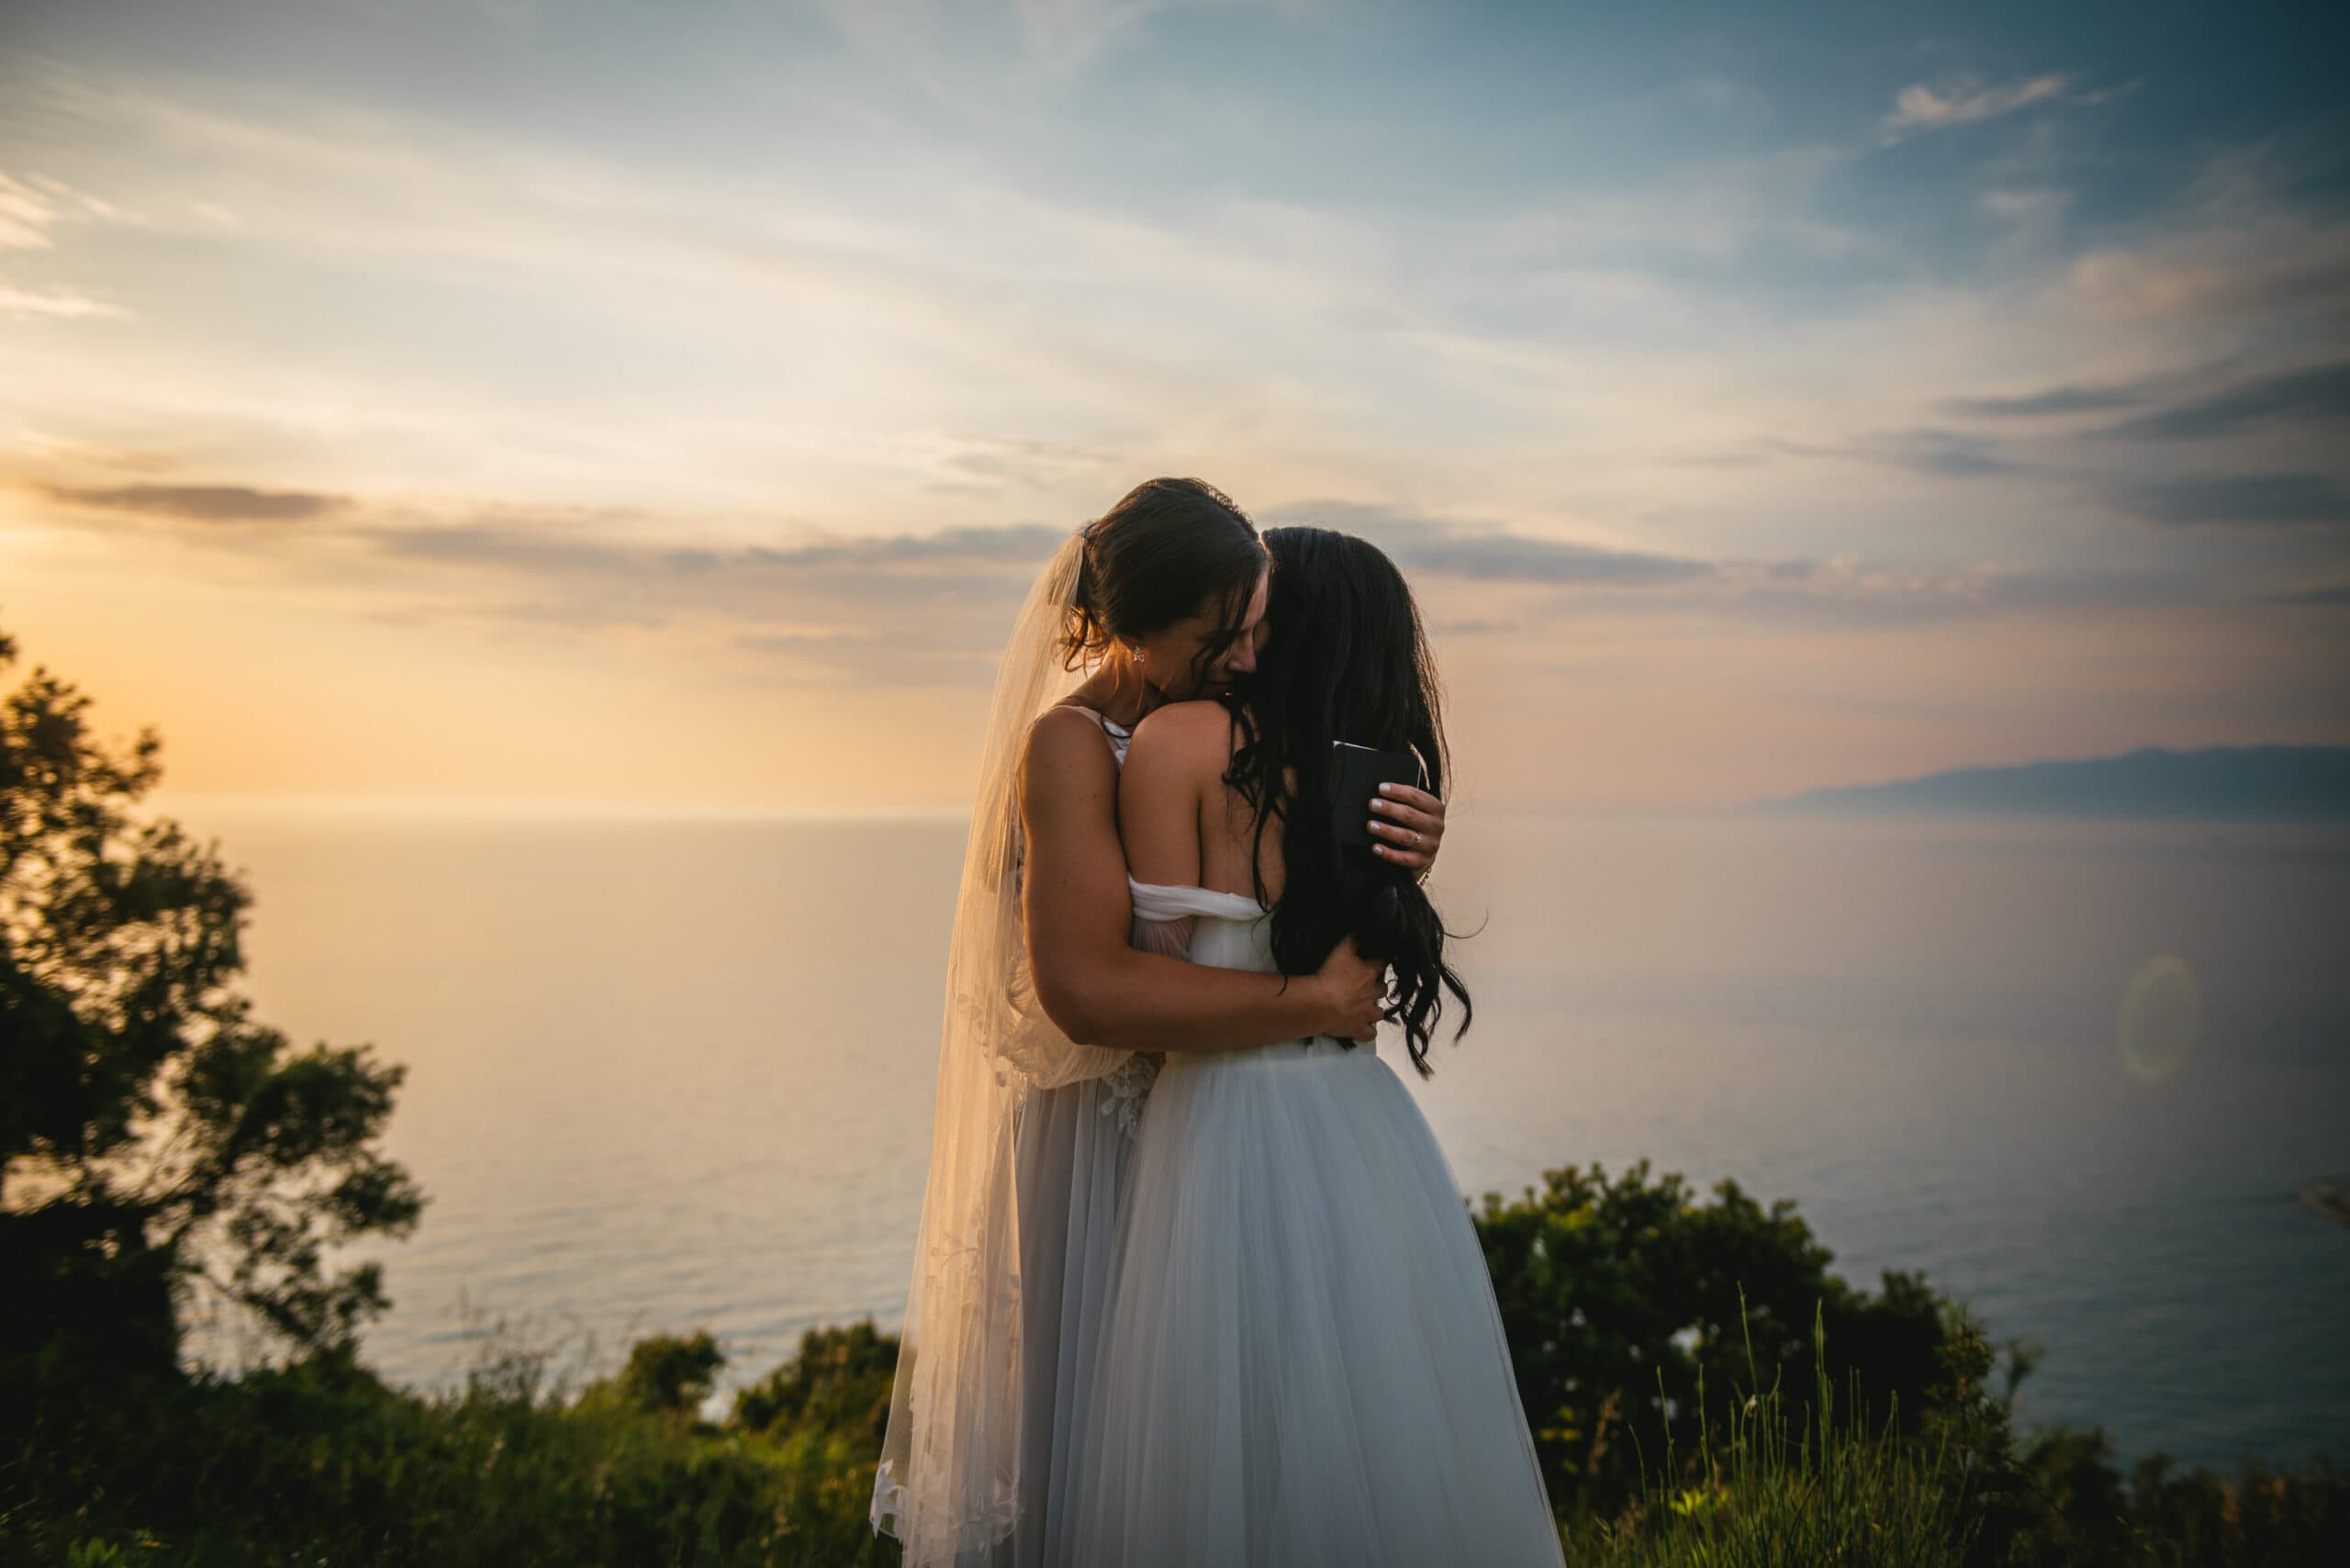 A snapshot of the couple's loving embrace during the Corfu elopement ceremony.